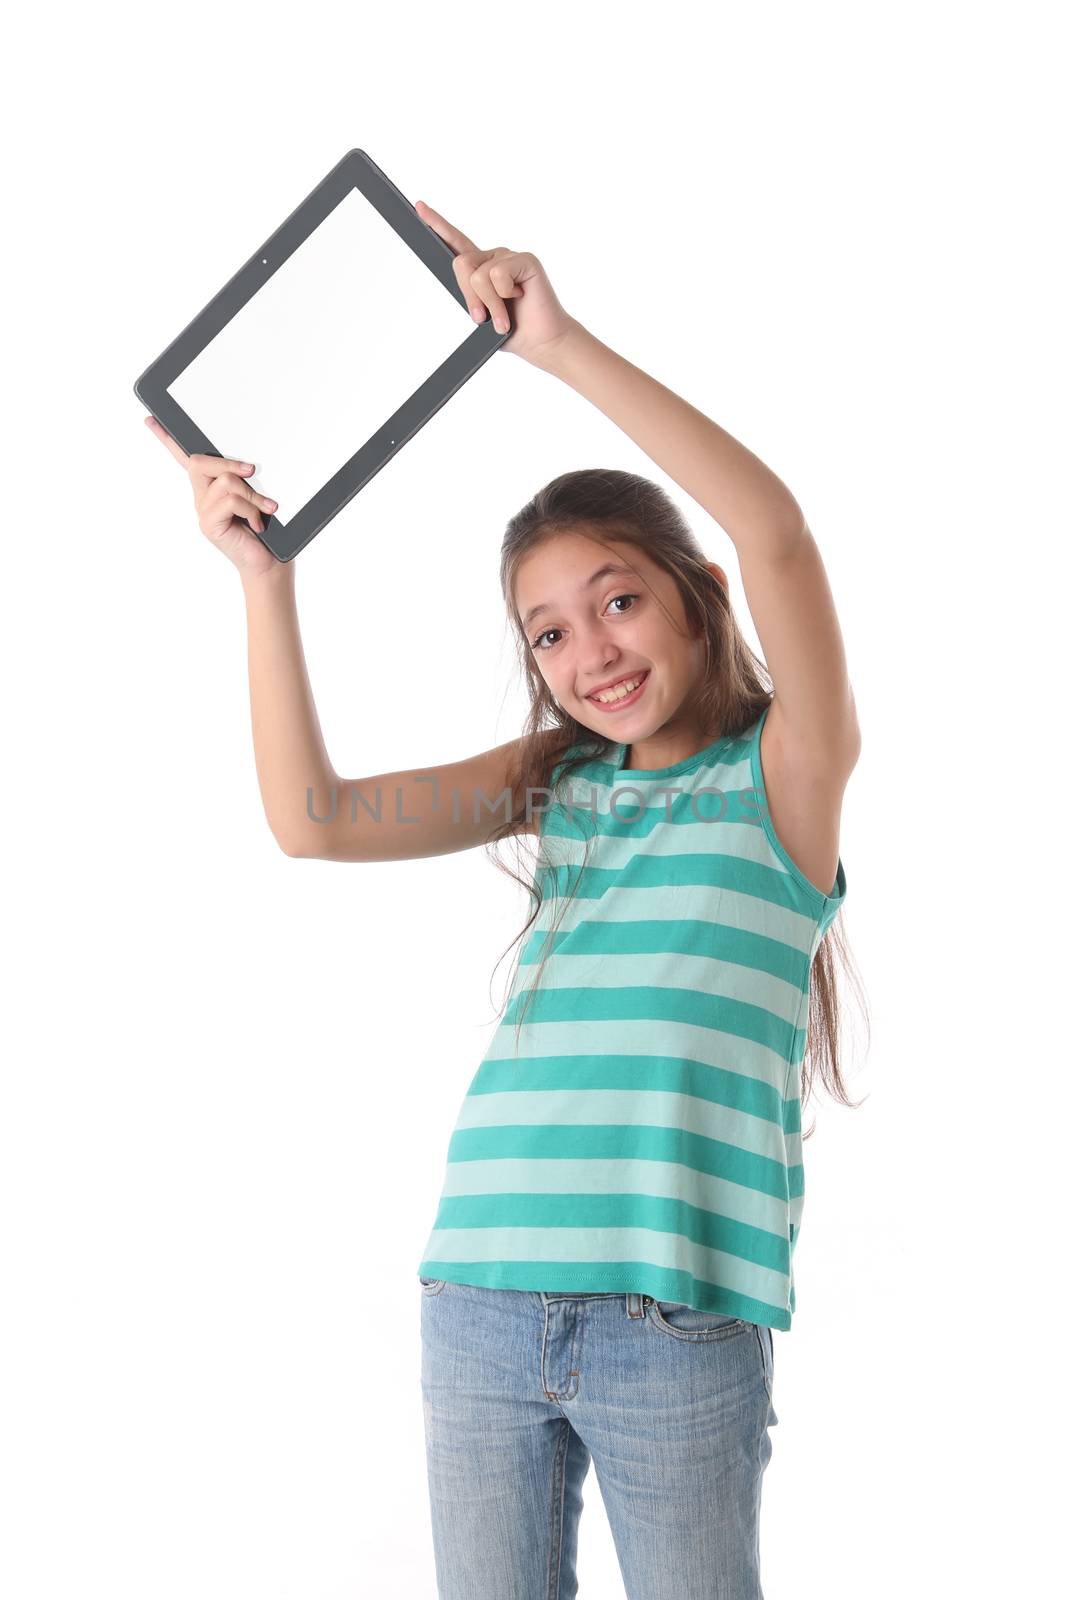 Beautiful pre-teen girl with a tablet computer. by Erdosain